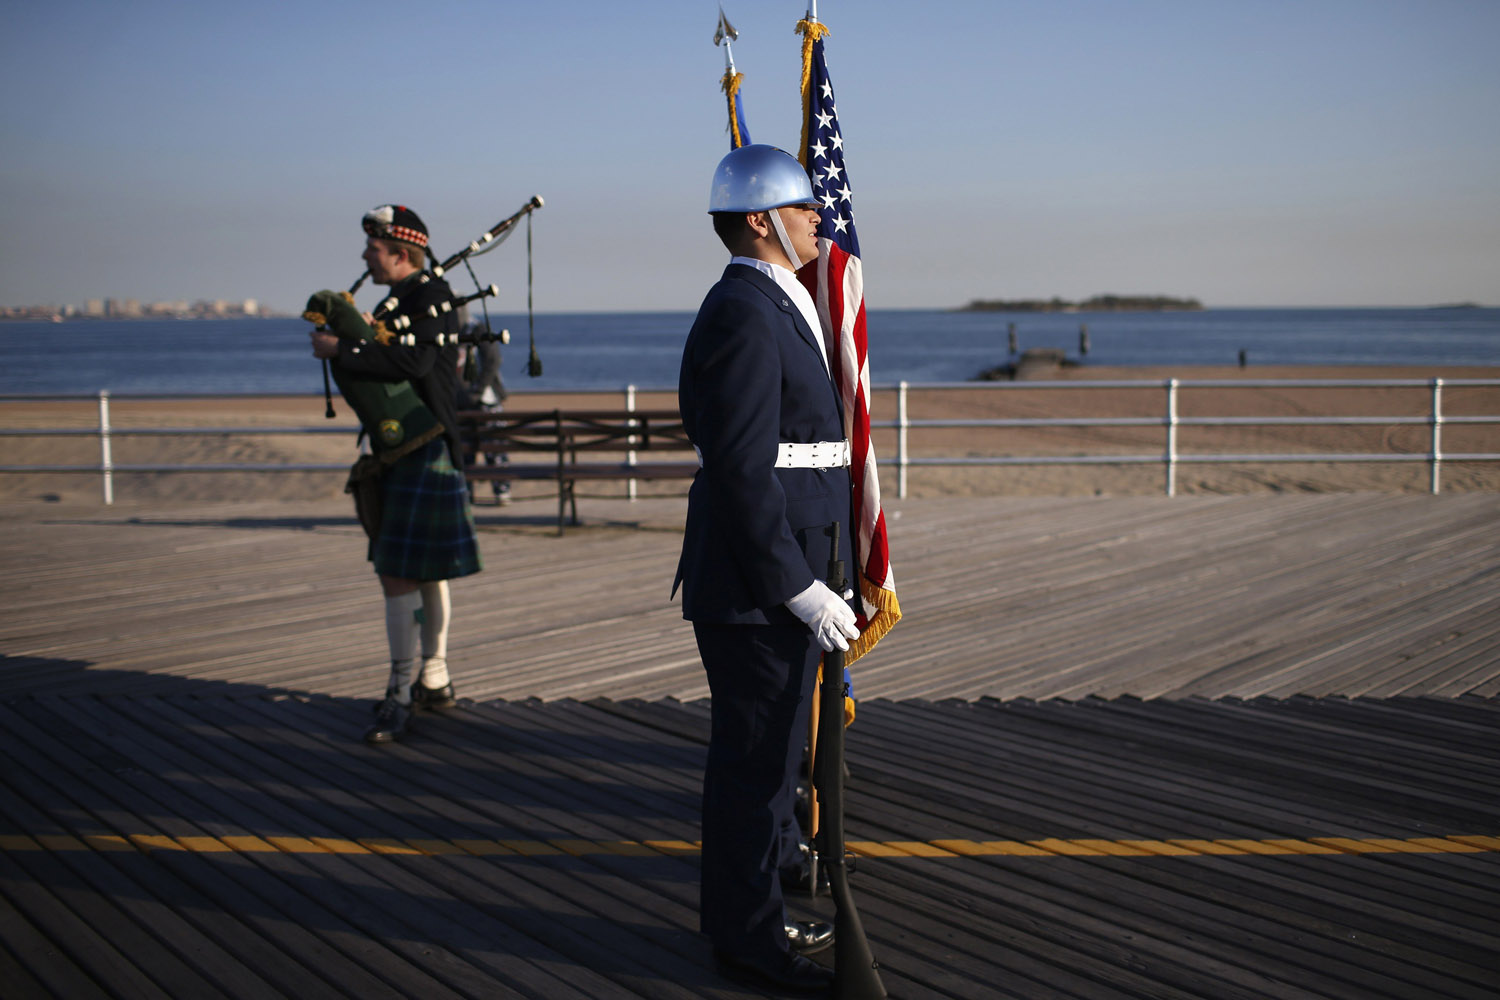 Oct. 29, 2013. A guard and bagpipe player stand on the boardwalk on the south shore of Staten Island in New York City during an event to commemorate the one-year anniversary of Hurricane Sandy.